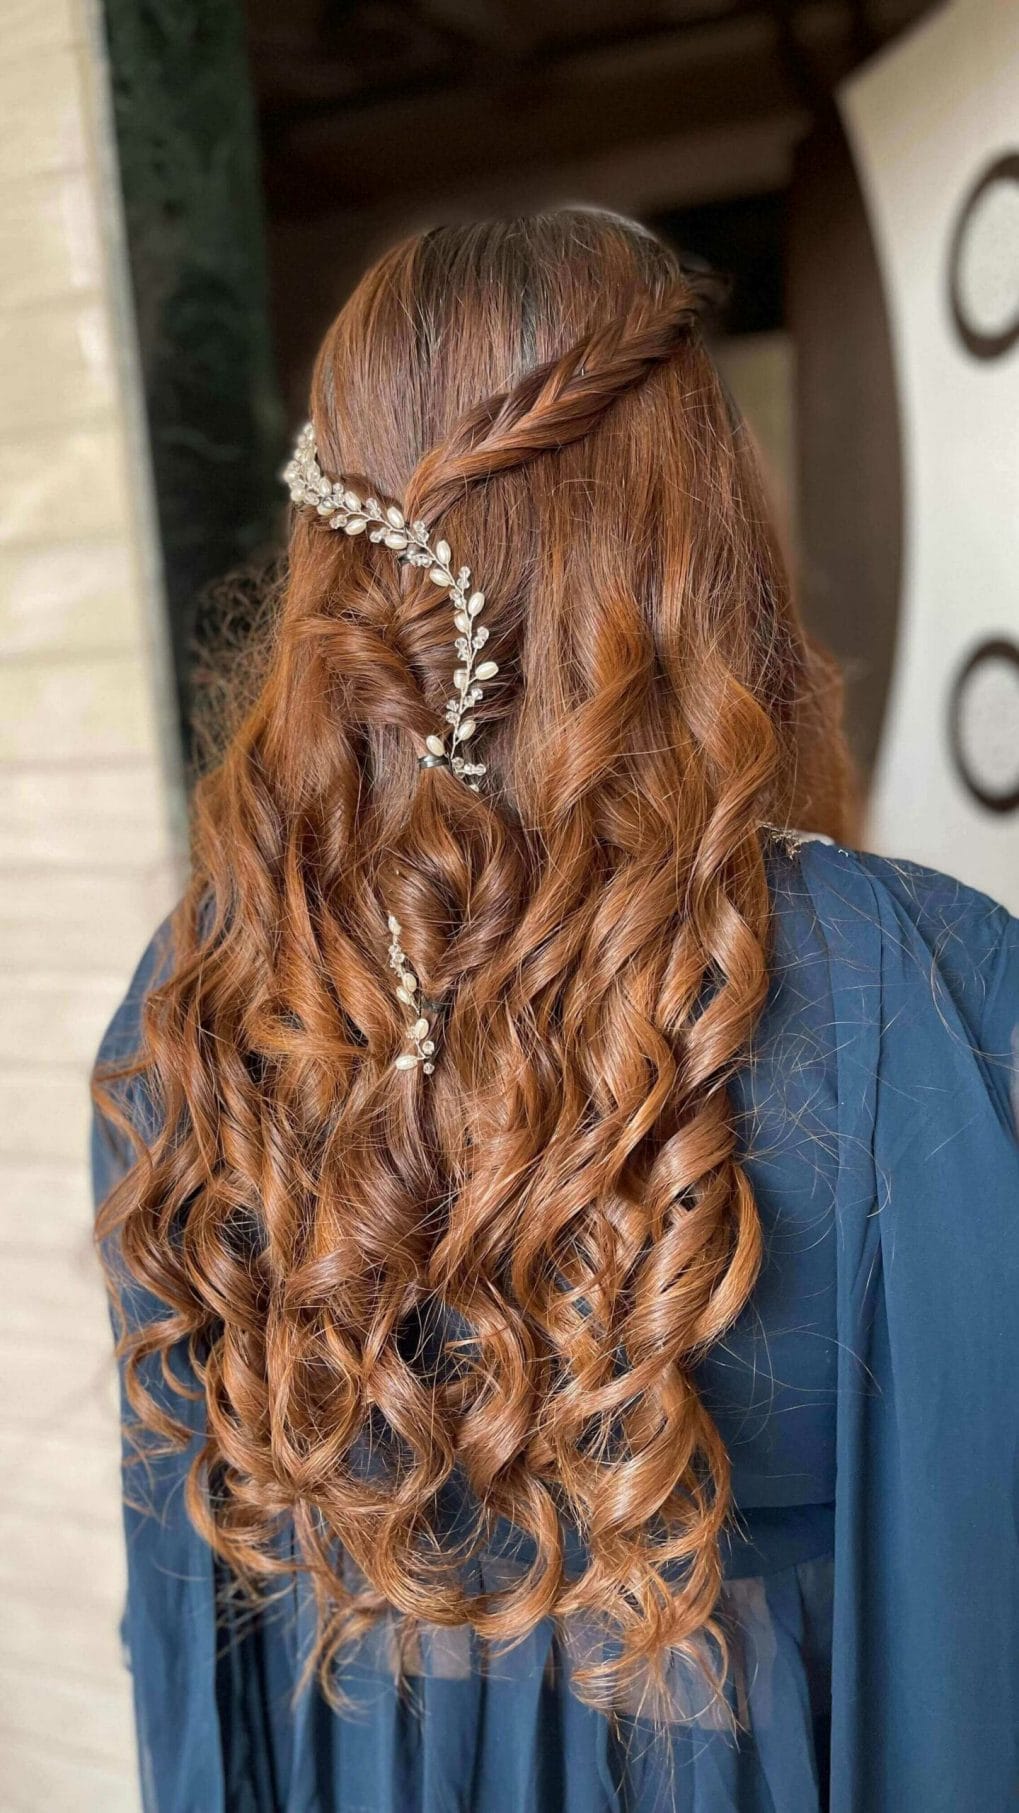 Side braid in auburn curls met with a sparkling accessory